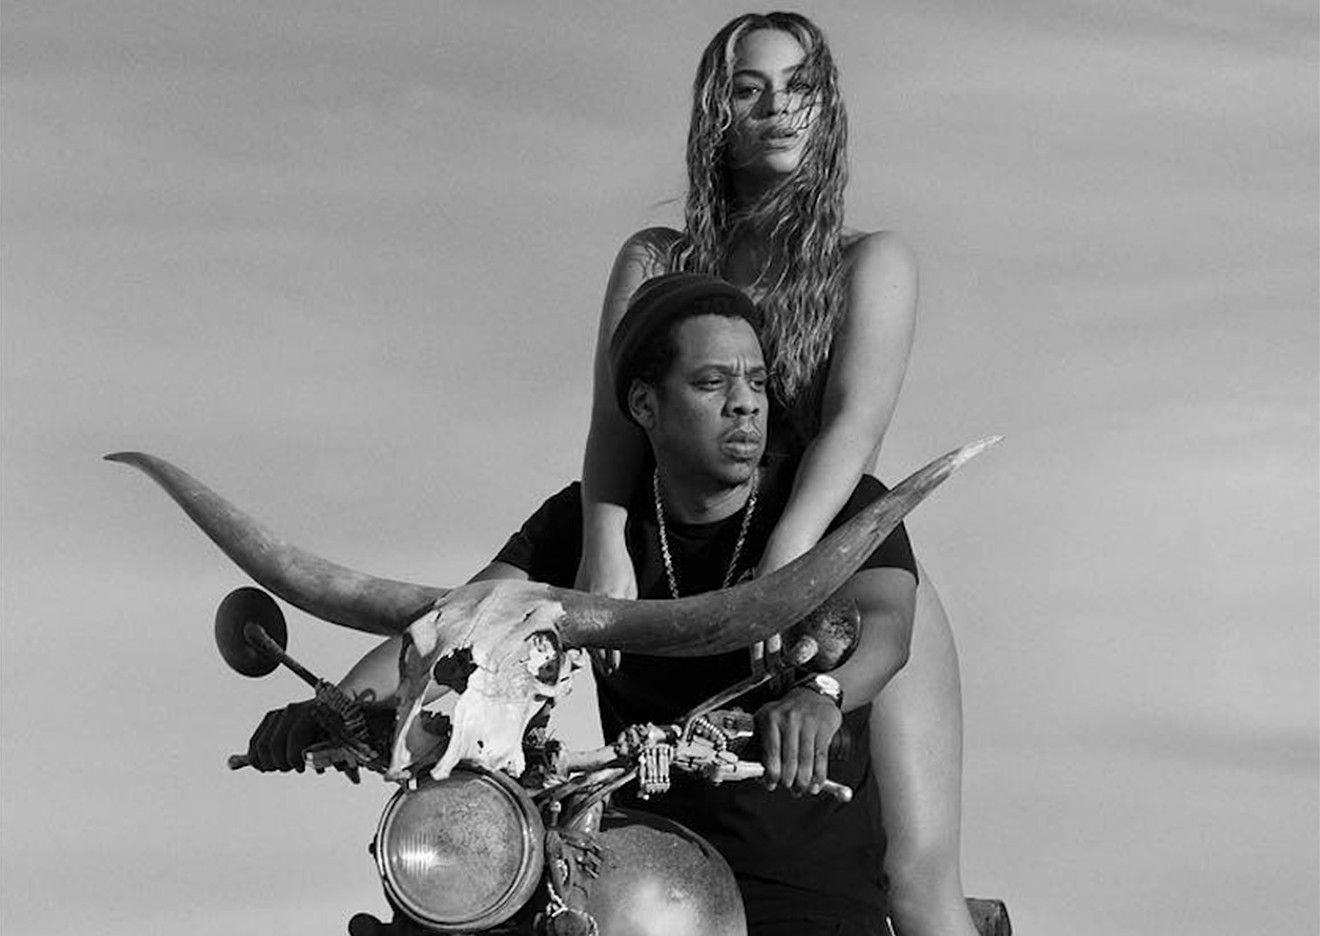 Beyoncé and Jay-Z are scheduled to perform on Wednesday, September 19, at State Farm Stadium in Glendale.